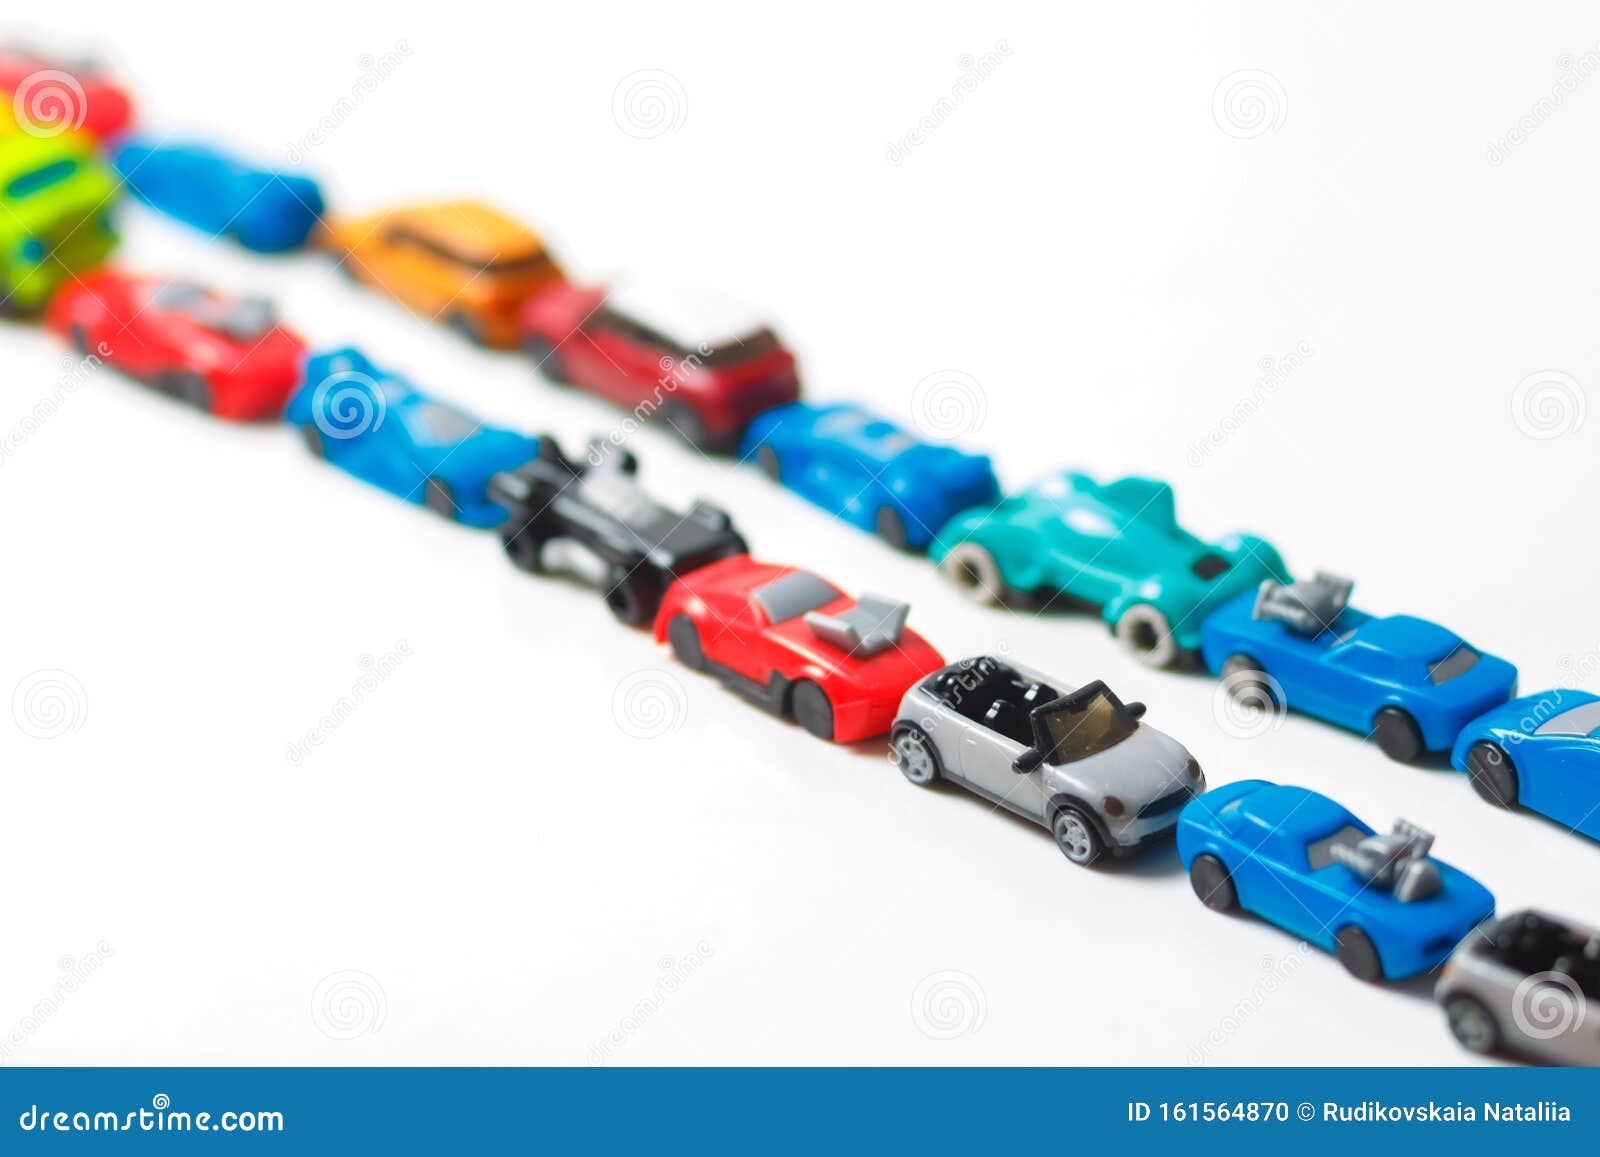 plastic multi-colored toy cars are lined up on a white background. stereotypical alignment of subjects is a sign of autism.